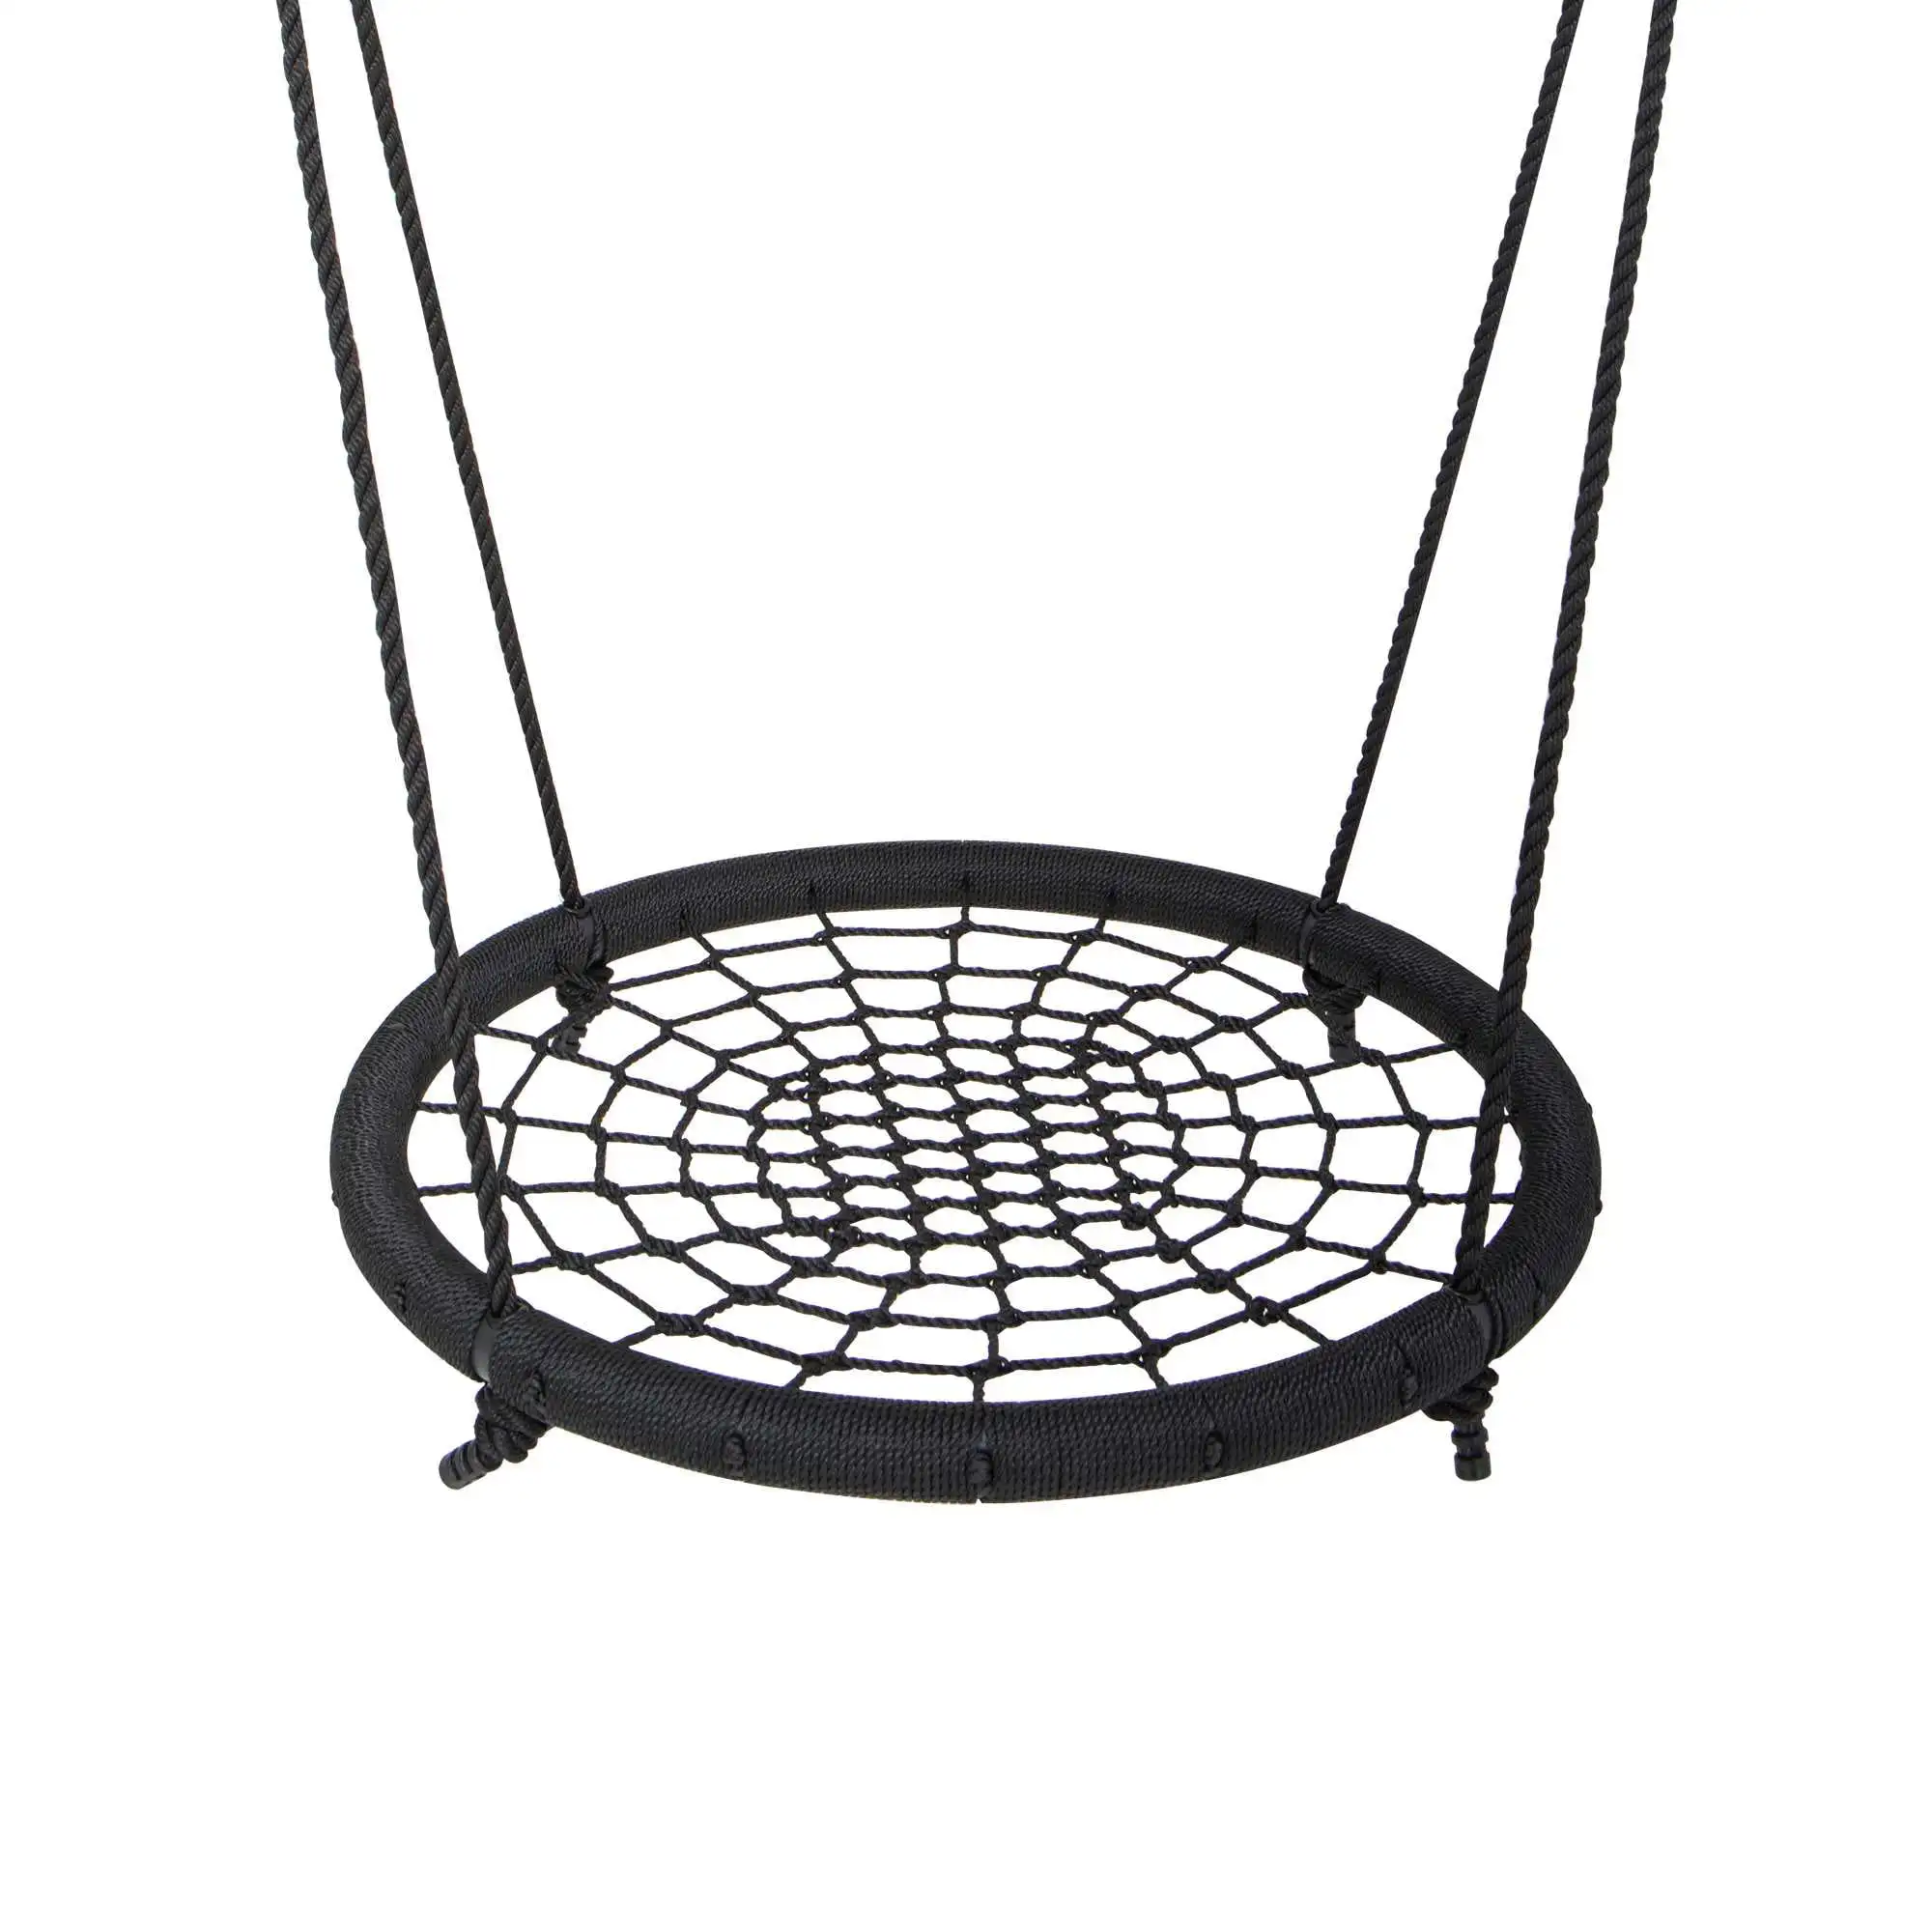 Rope Spider Swing for Play Sets in Black, 90850